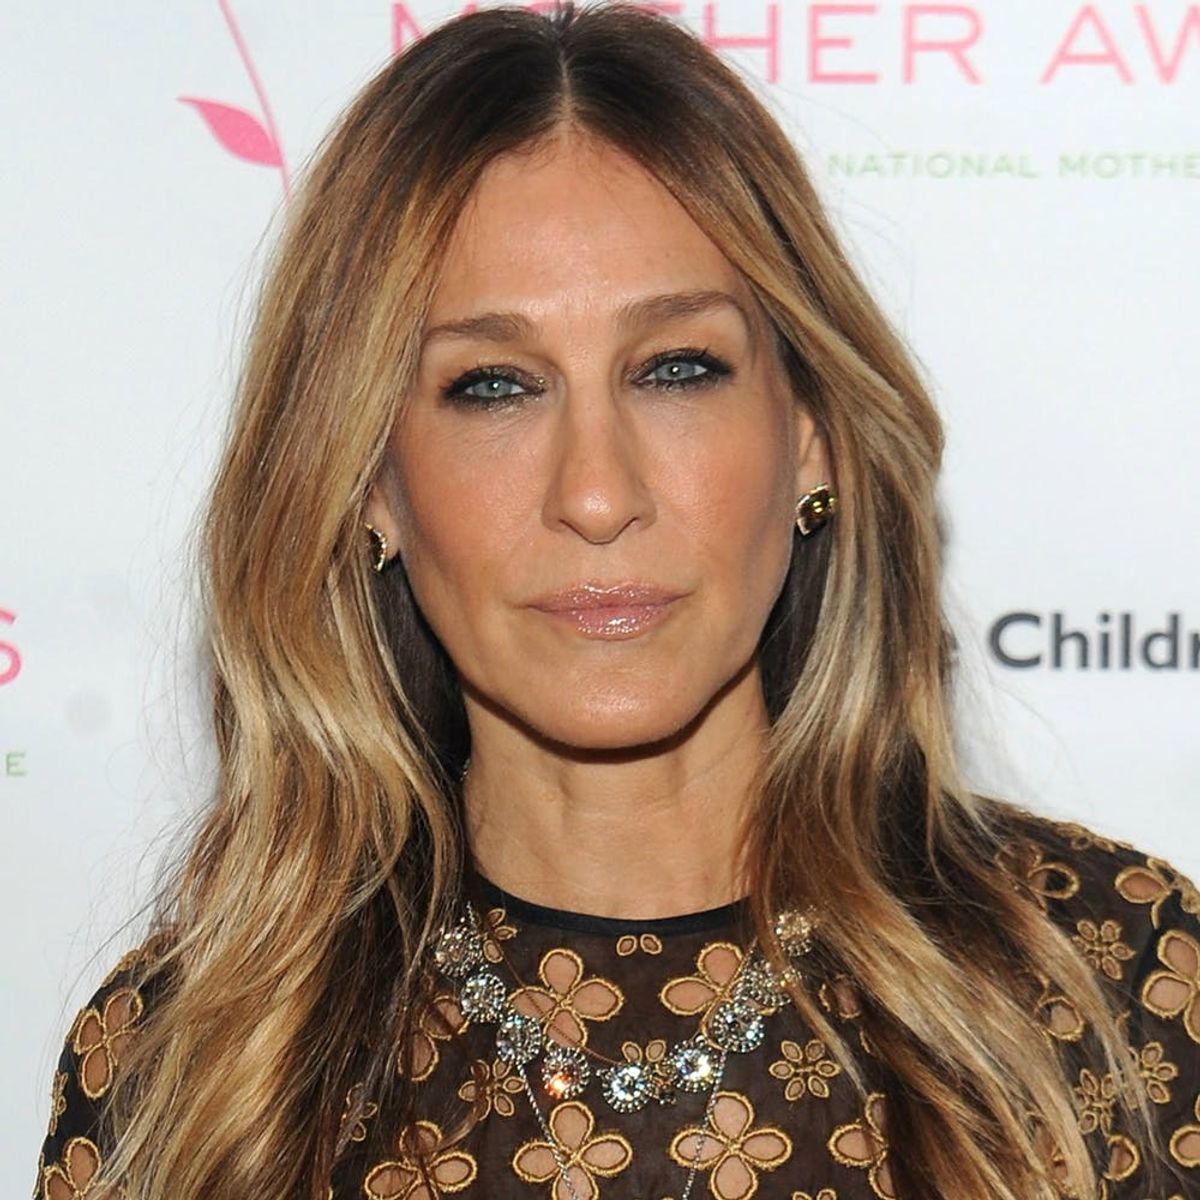 Sarah Jessica Parker Has Some Harsh Words for the Makers of EpiPen